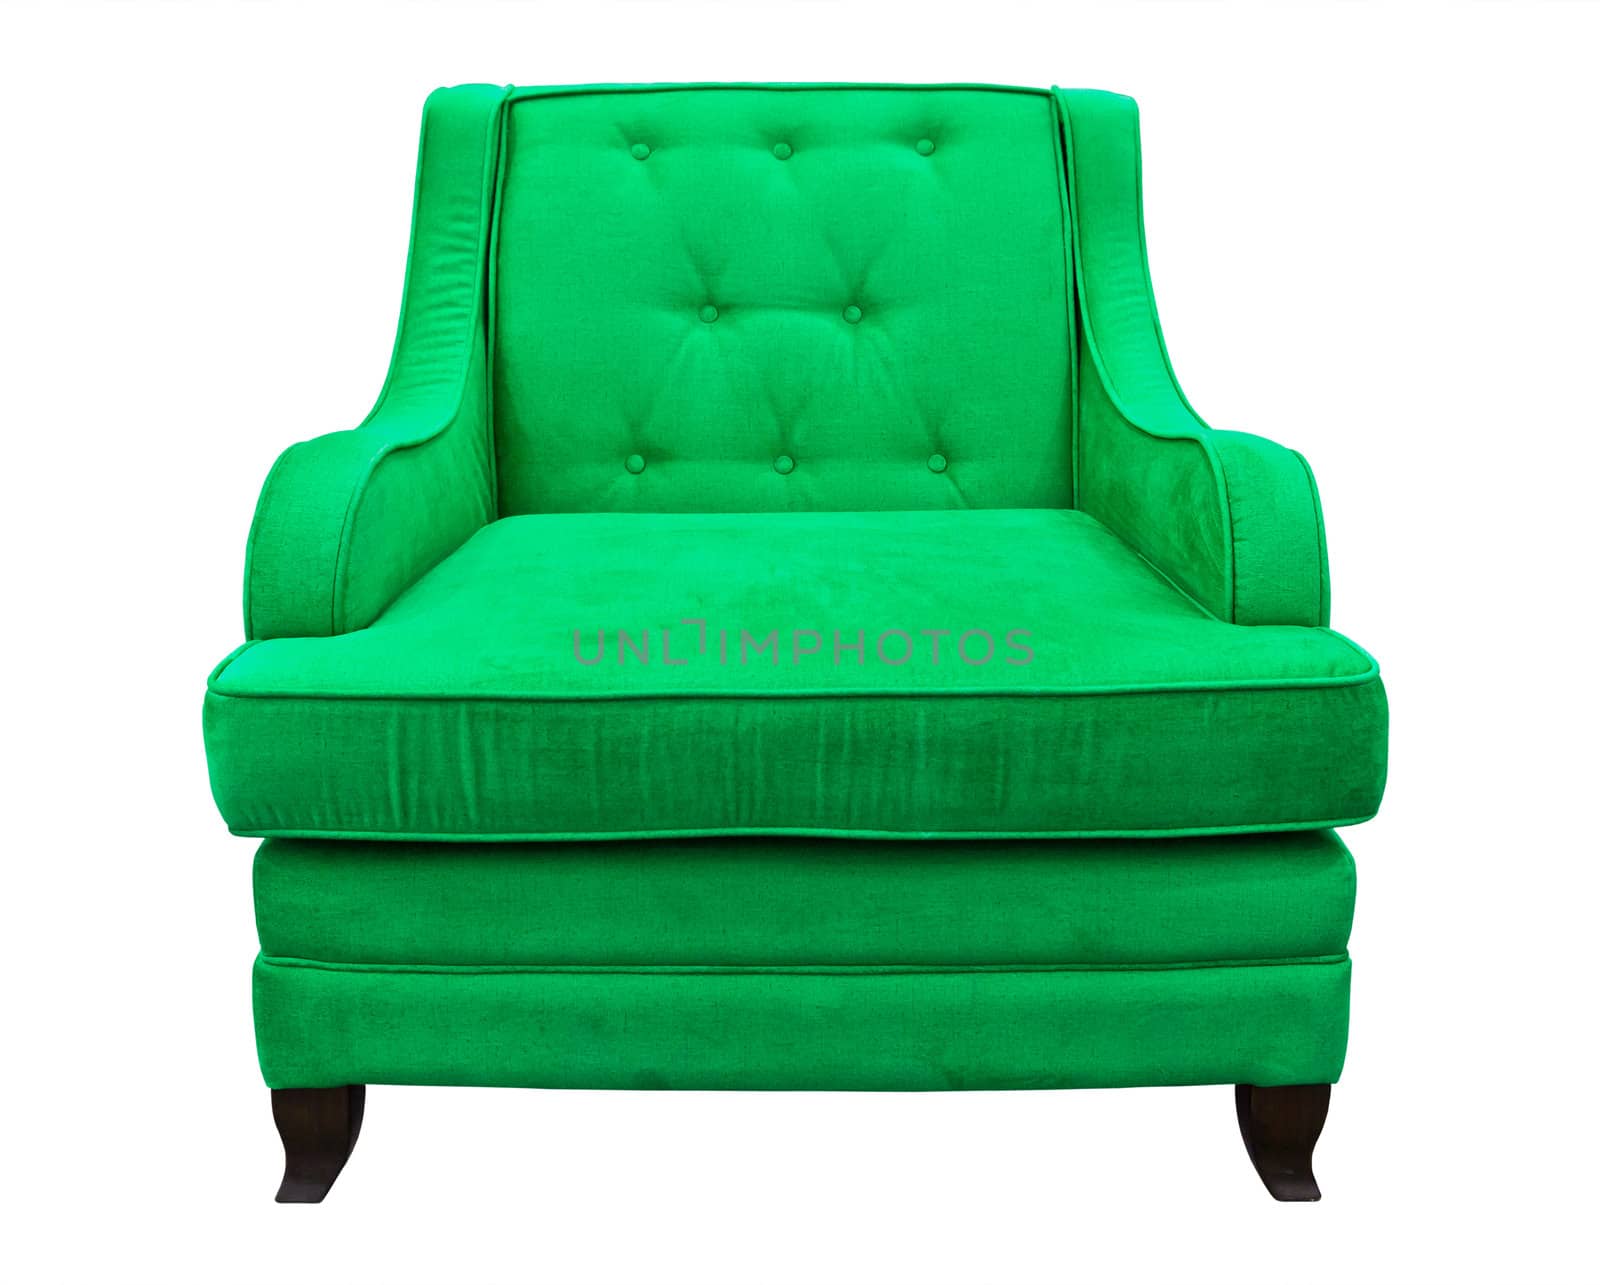 green sofa isolated by tungphoto